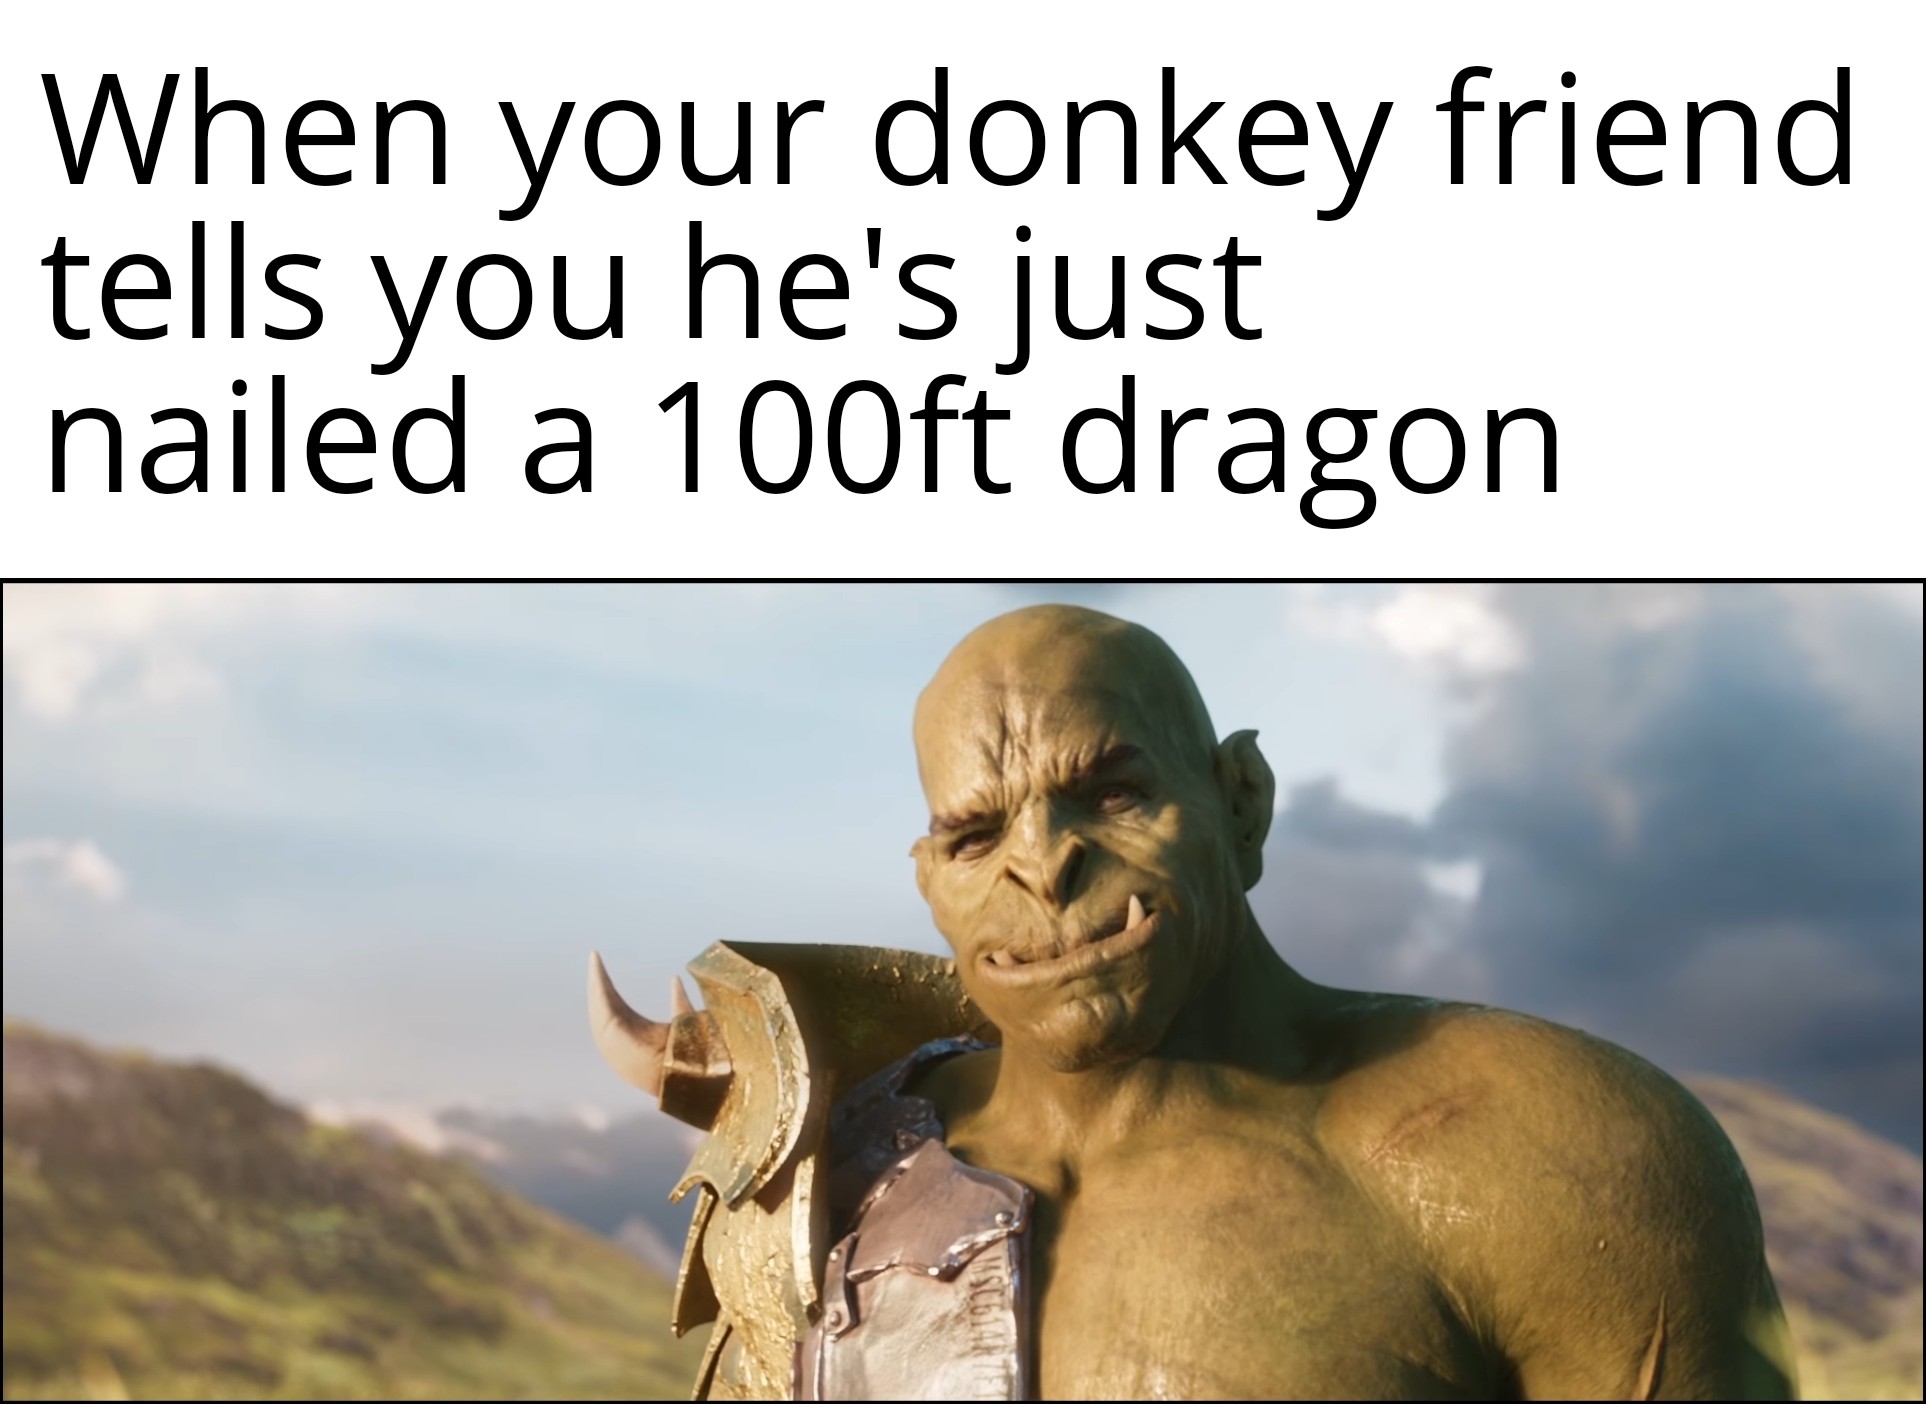 dank memes - When your donkey friend tells you he's just nailed a 100ft dragon